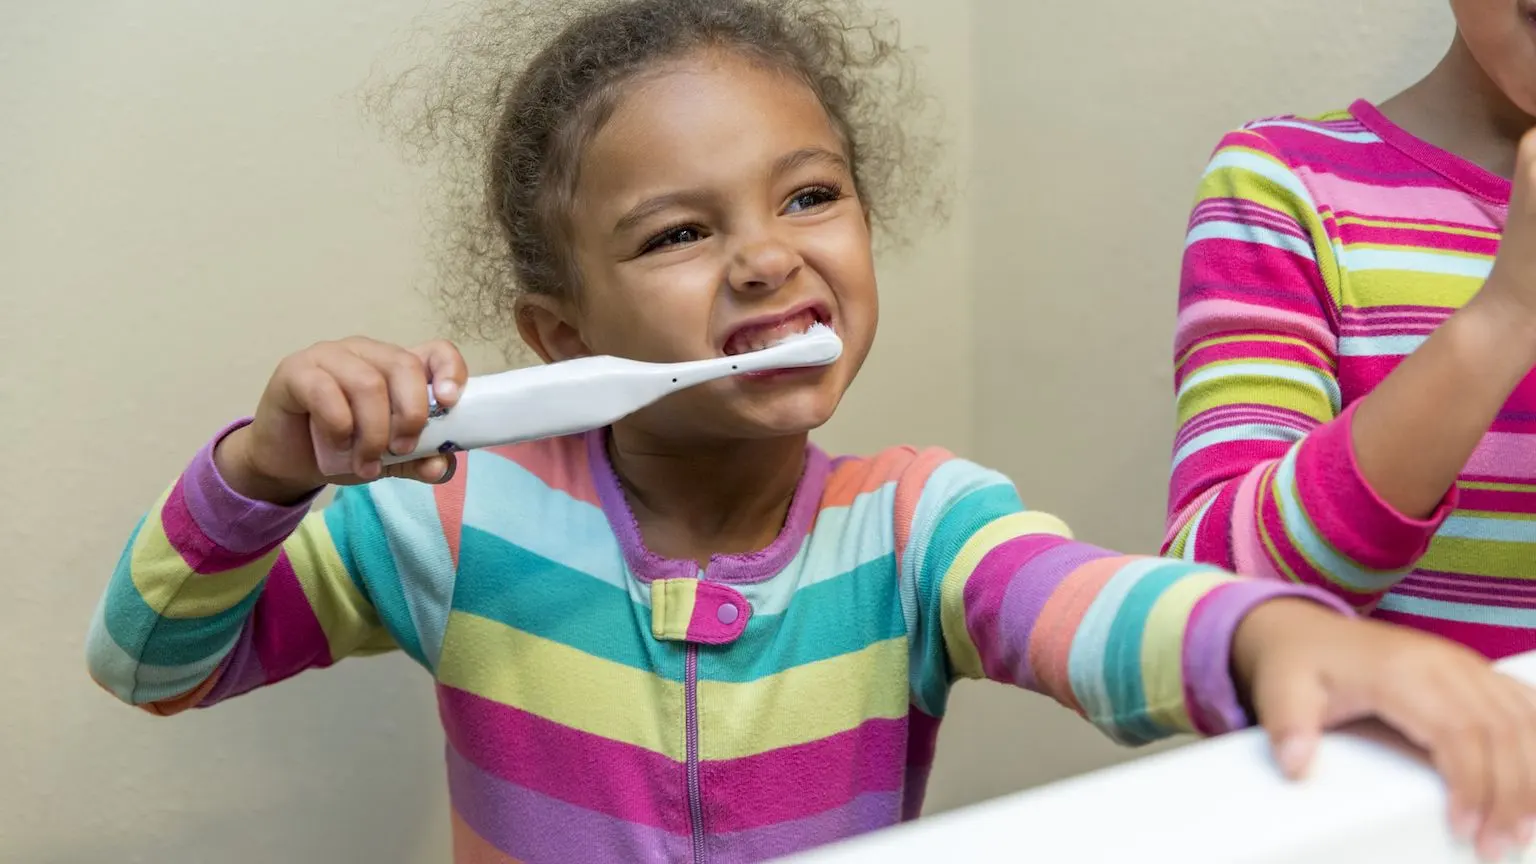 A little girl in bright pyjamas brushing her teeth in front of a mirror